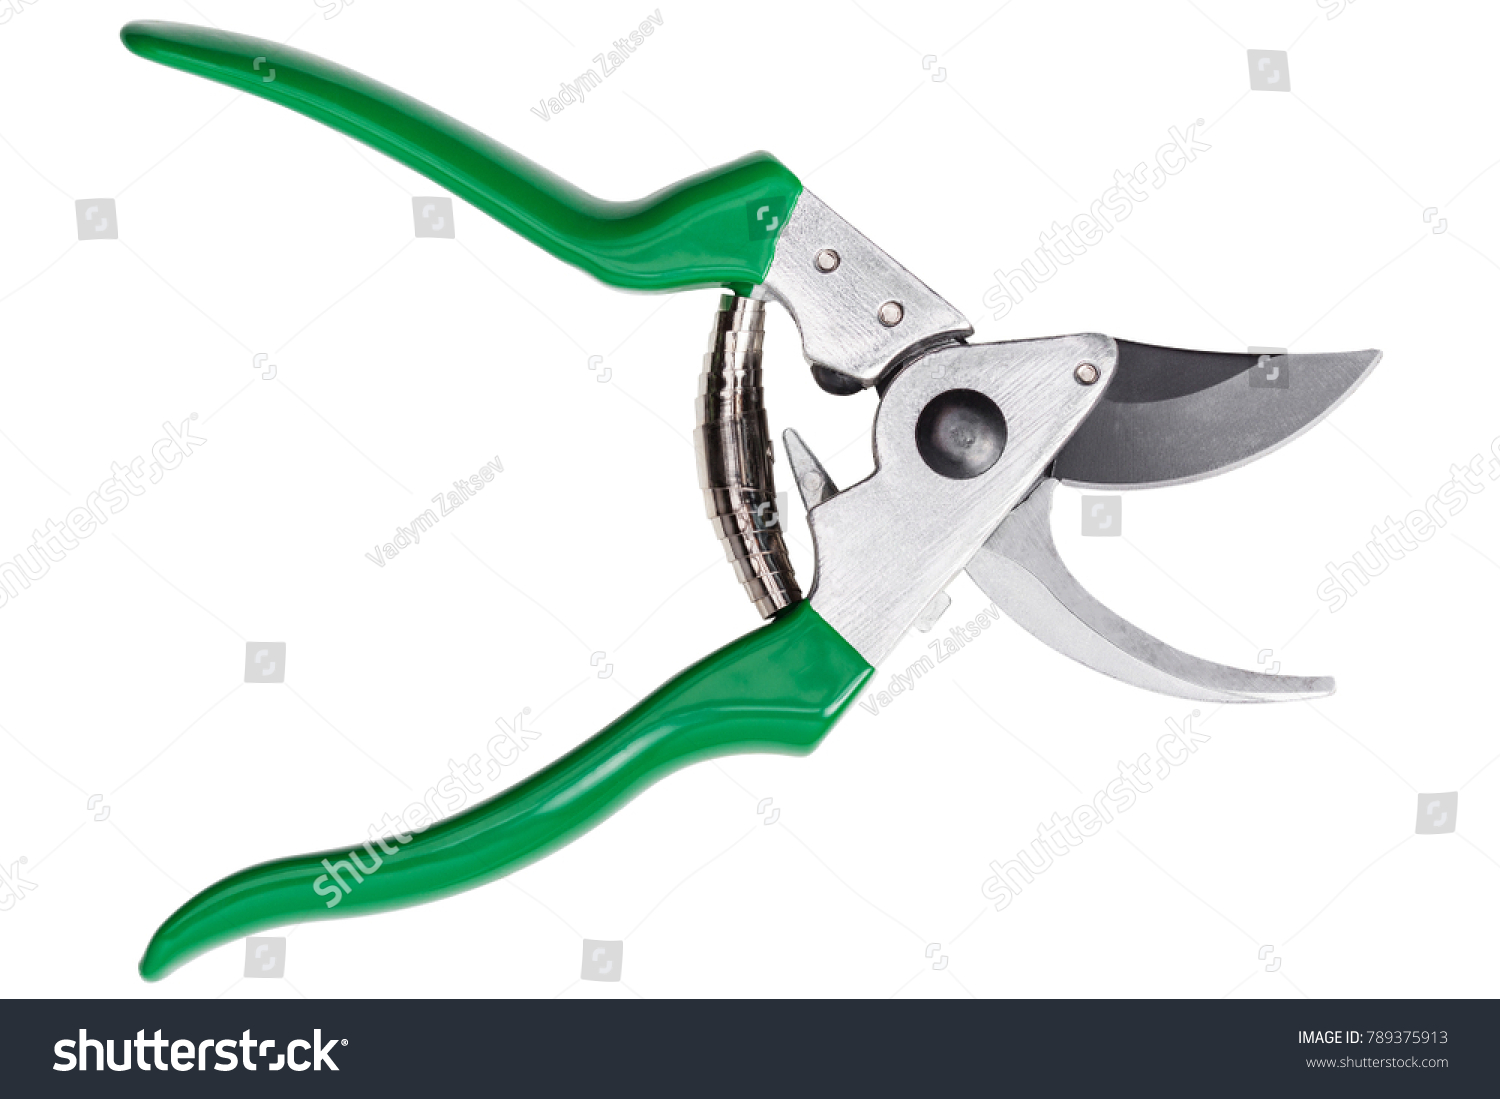 Garden secateurs isolated on a white background with clipping paths #789375913